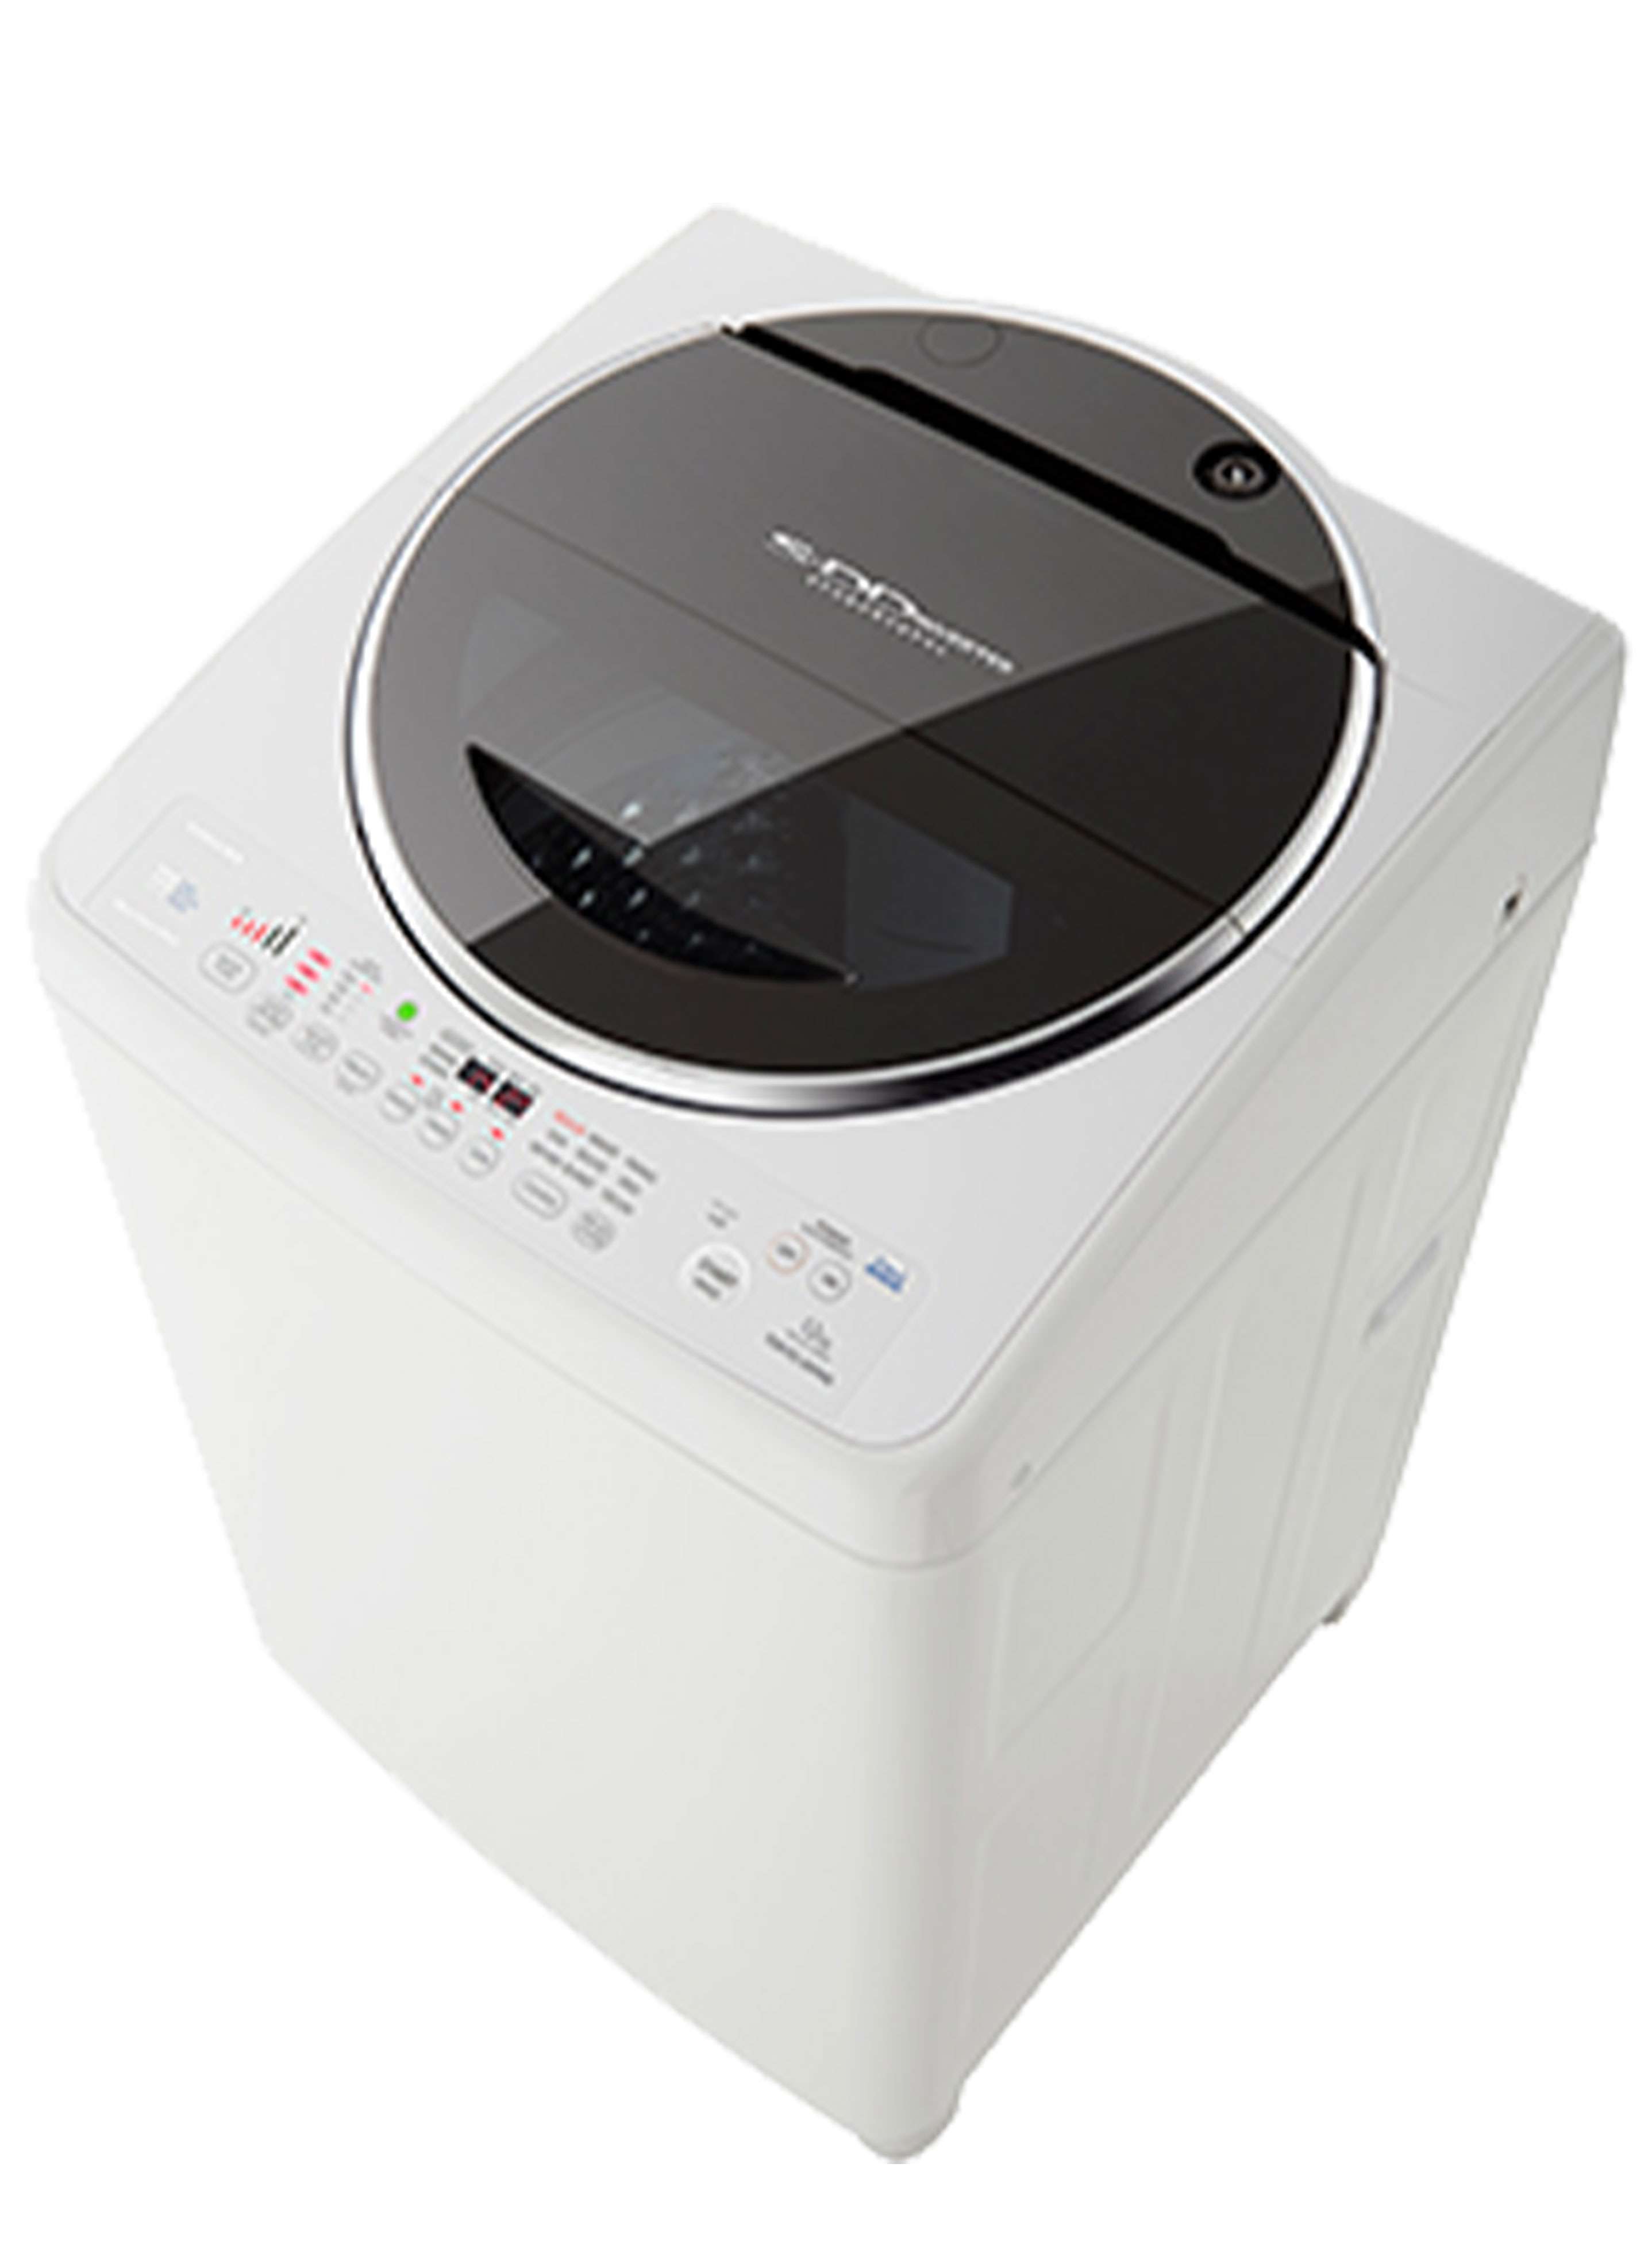 12 KG Top Load Washing Machine | Toshiba Middle East